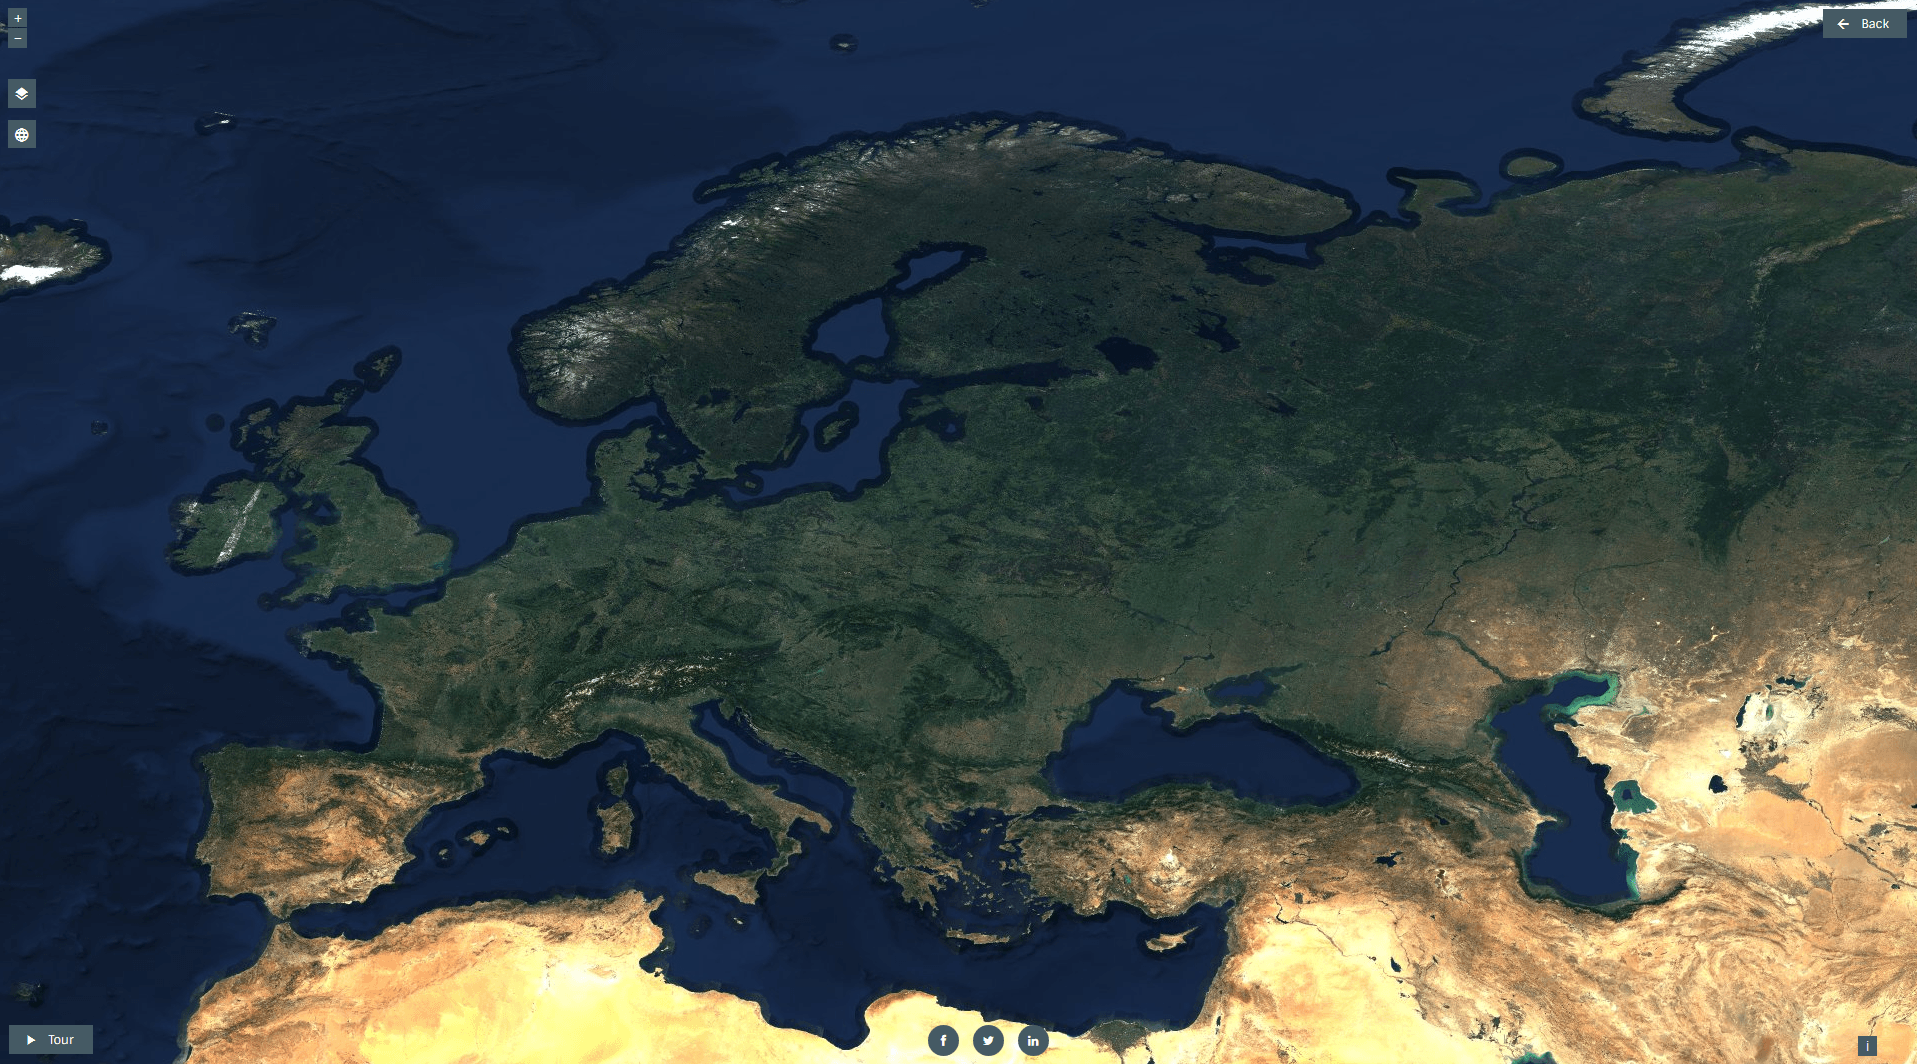 Europe and North Africa captured by Sentinel-2